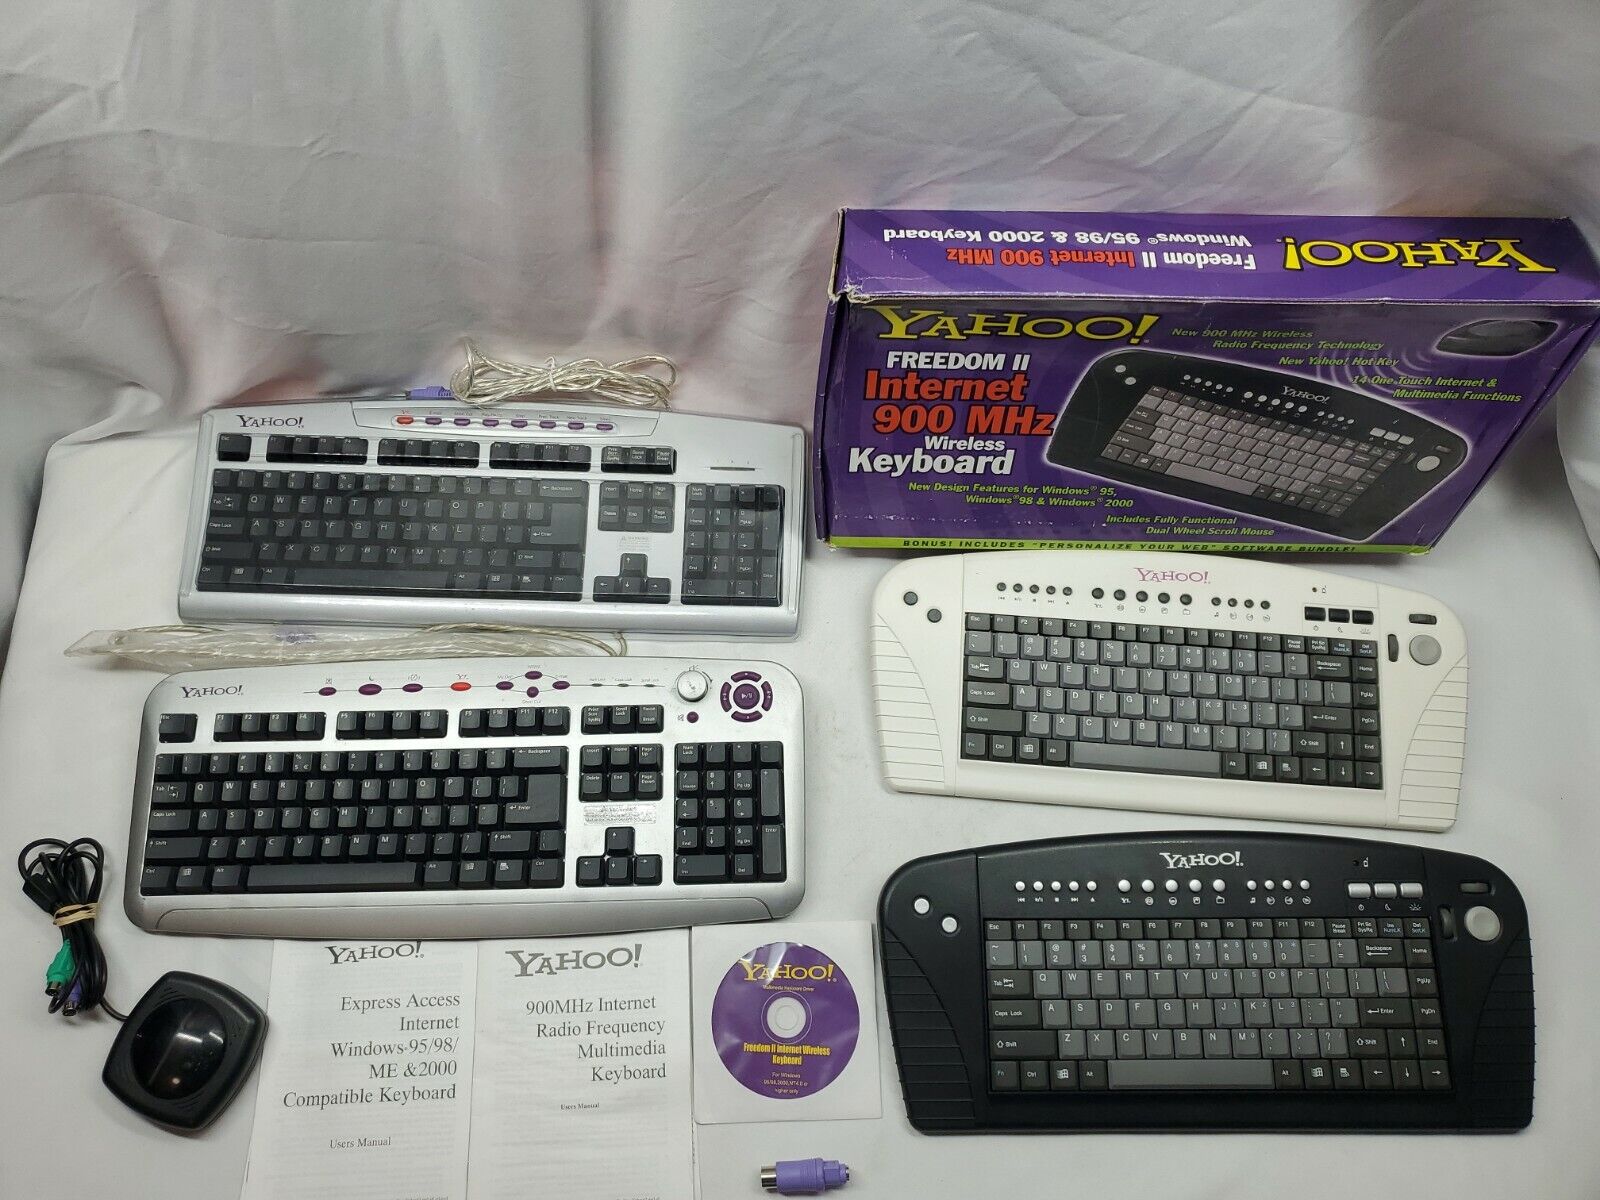 Yahoo! Direct Access Internet Keyboard Vintage lot wired & Wireless mouse yahoo Does Not Apply